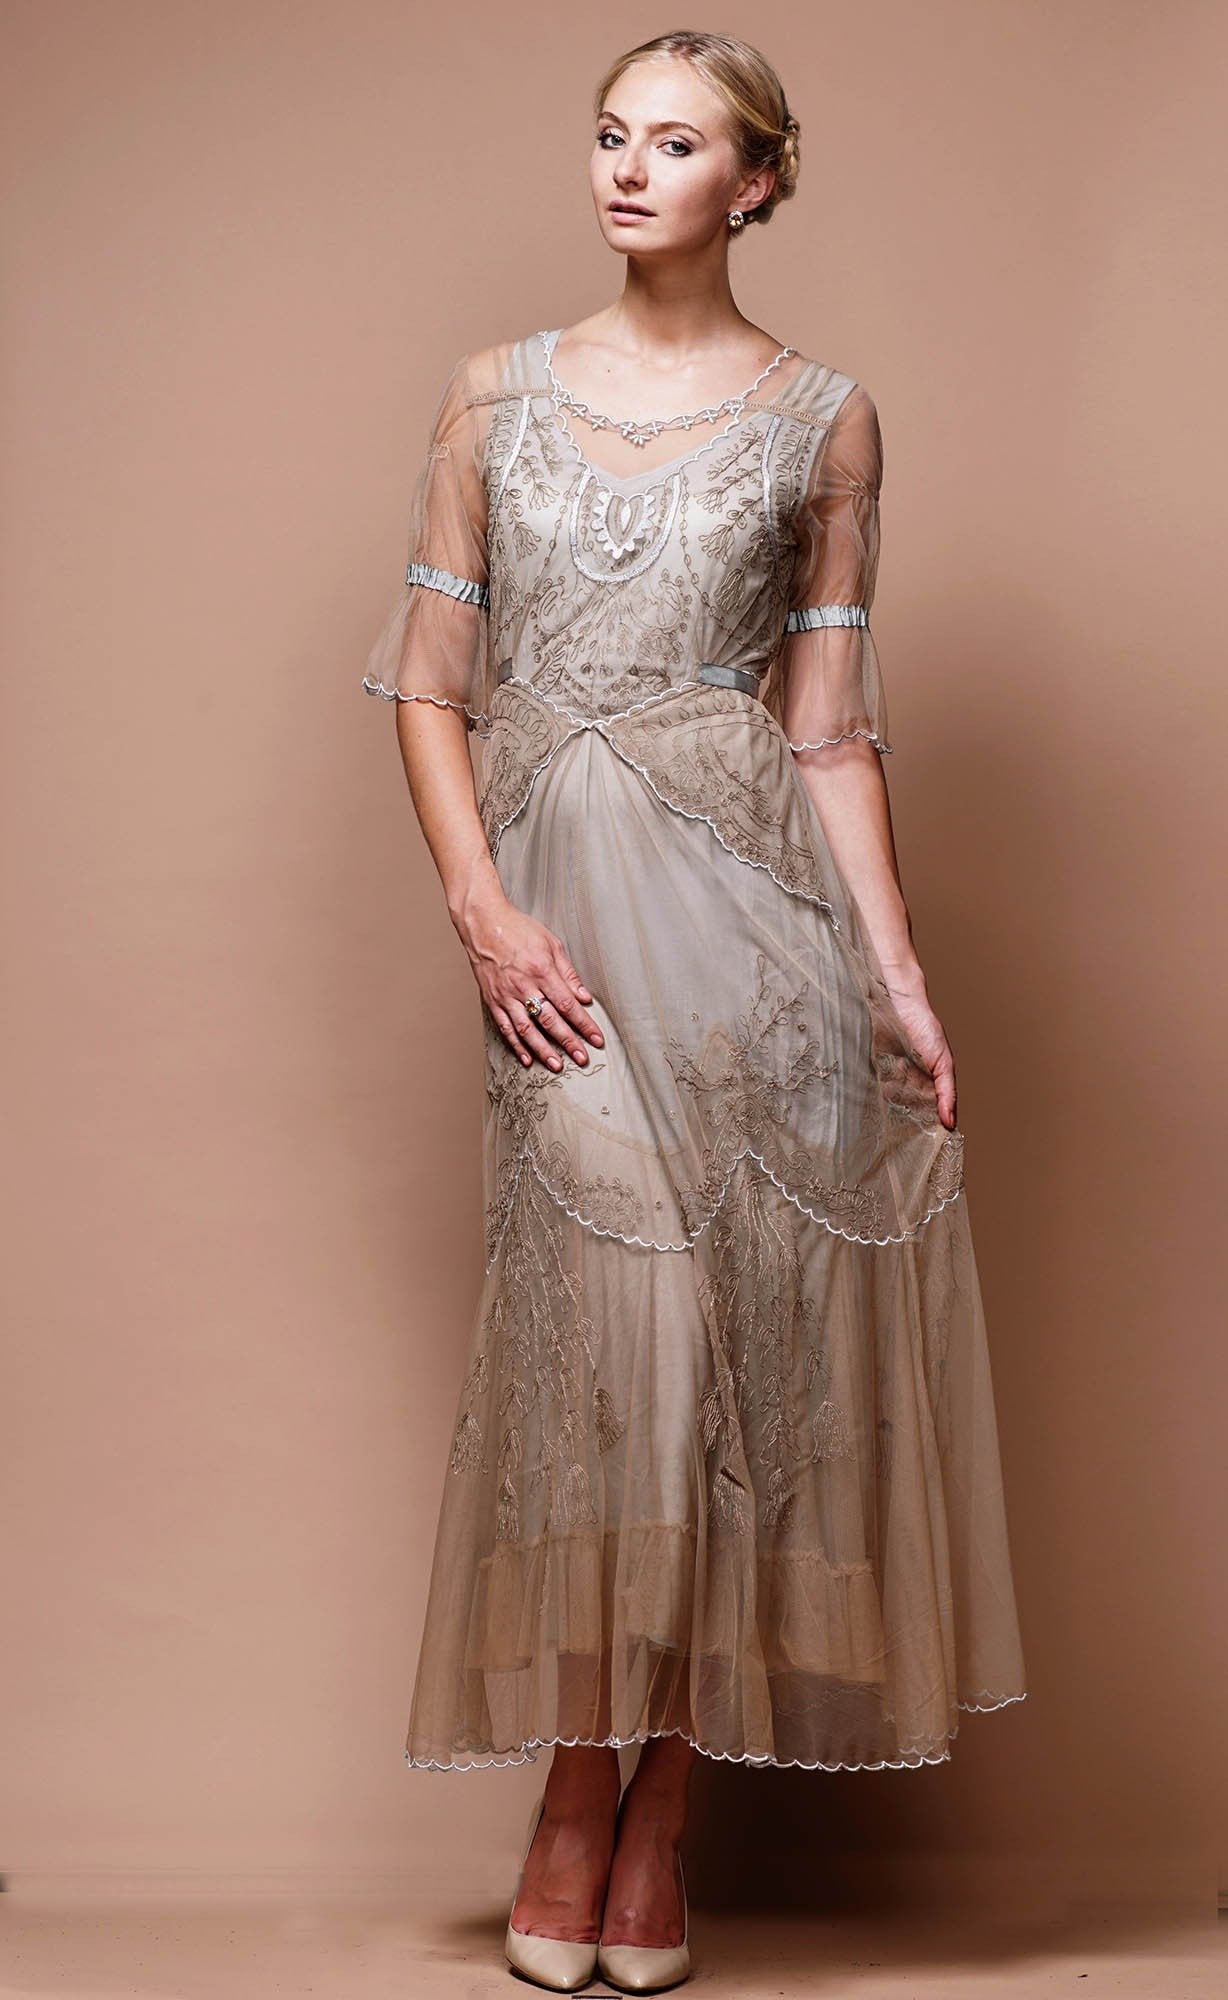 Edwardian Vintage Inspired Wedding Dress in Sand-Silver by Nataya - SOLD OUT